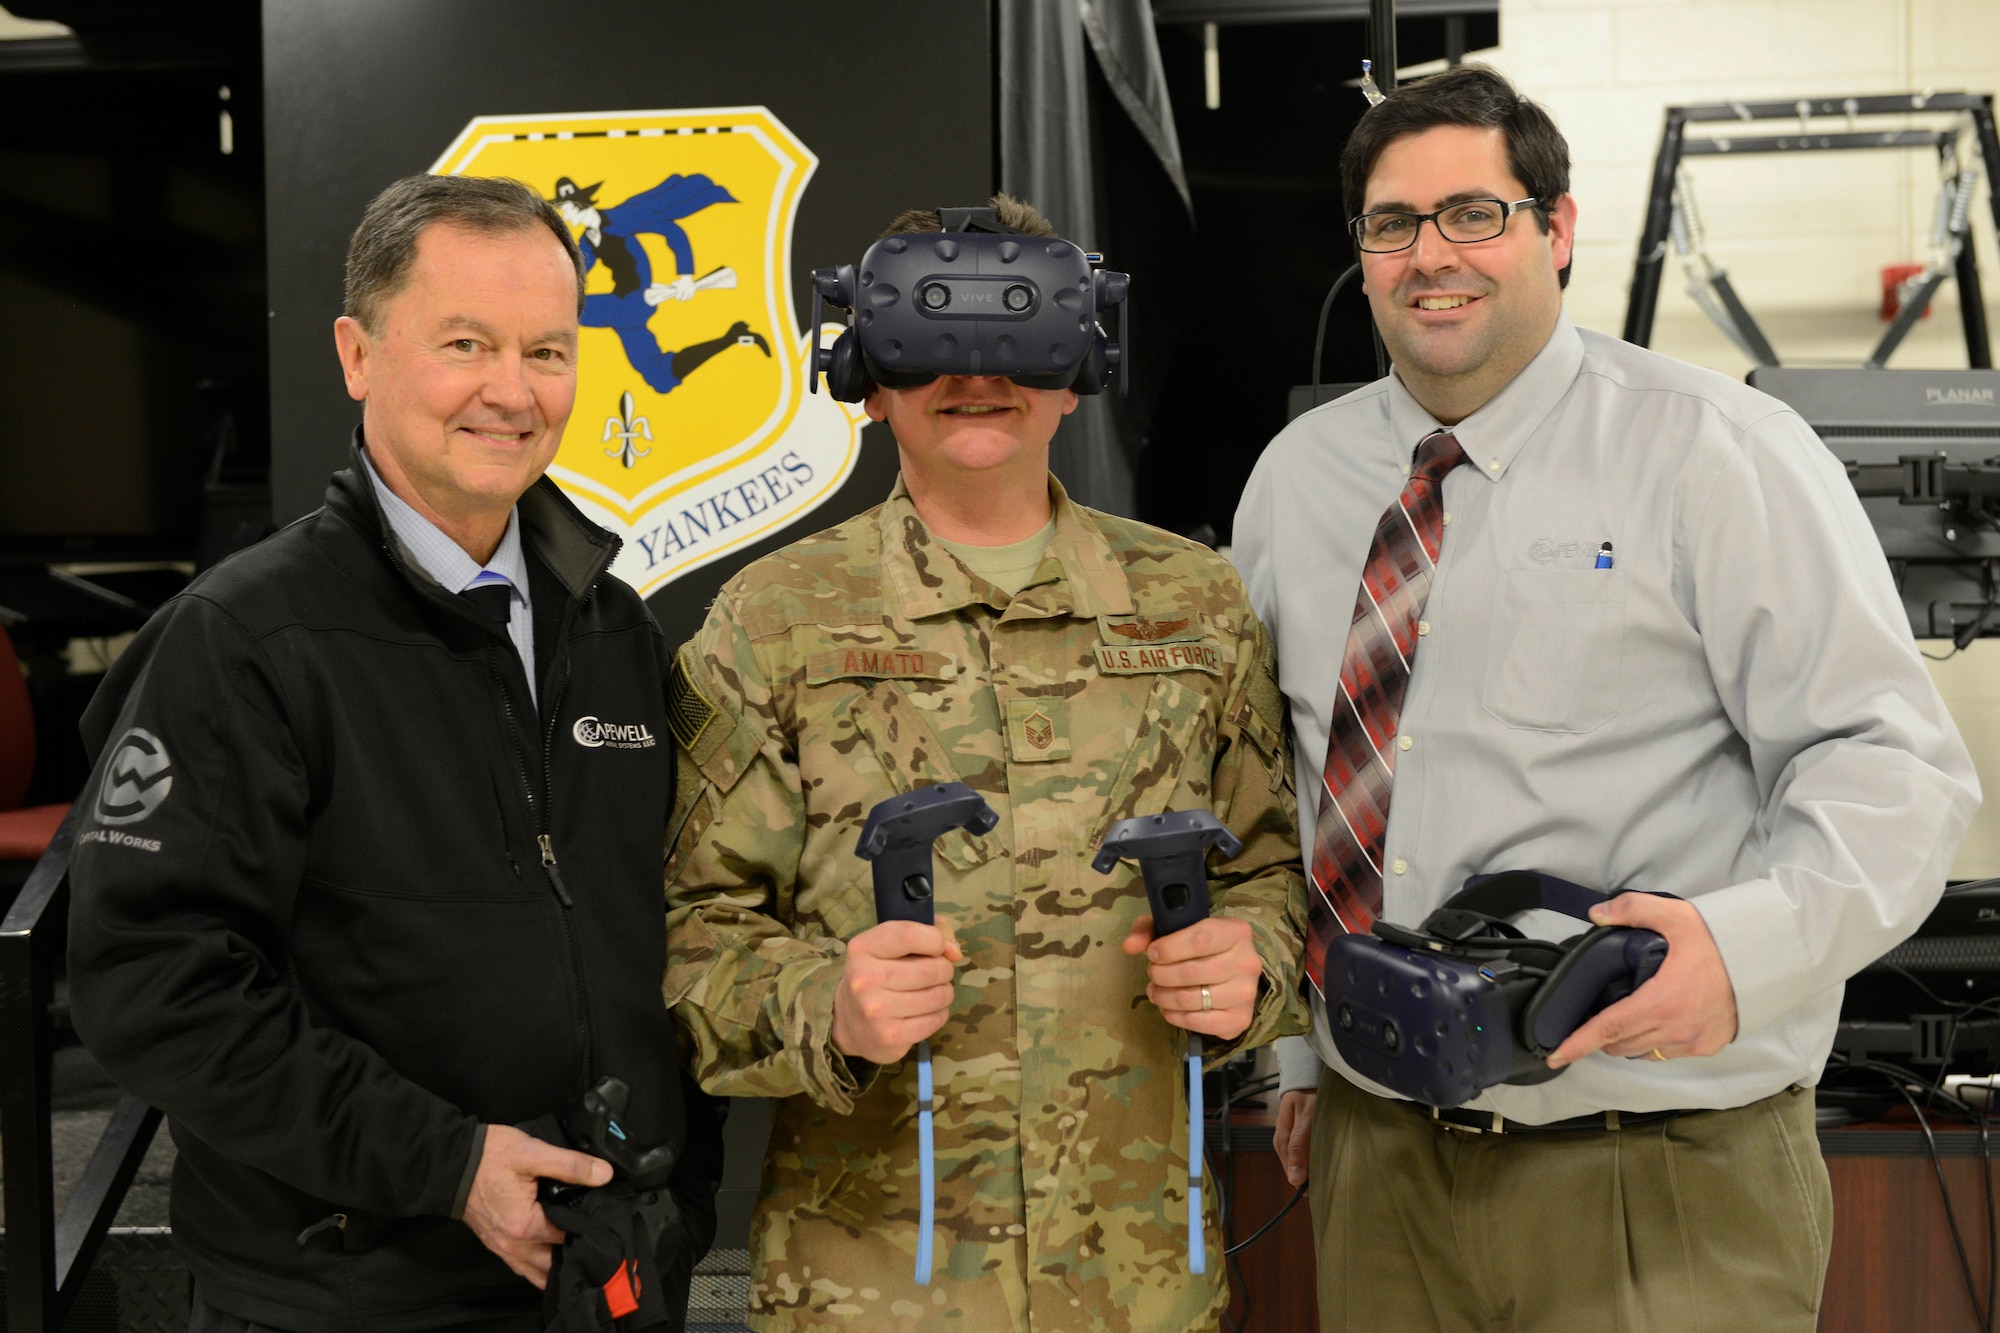 Bill Ehler, Business Development Manager of Capewell Aerial Systems (left), Master Sgt. Joseph Amato, 103rd Operations Group Evaluator Loadmaster, and Jared Burns, Director of Operations of Capewell Aerial Systems, take a break during a training session for the Virtual Reality Aerial Delivery Suite at Bradley Air National Guard Base on March 29, 2019. The VRADS system is designed to supplement training for loadmasters in a realistic virtual atmosphere. (U.S. Air Force photo by Staff Sgt. Chad Warren)